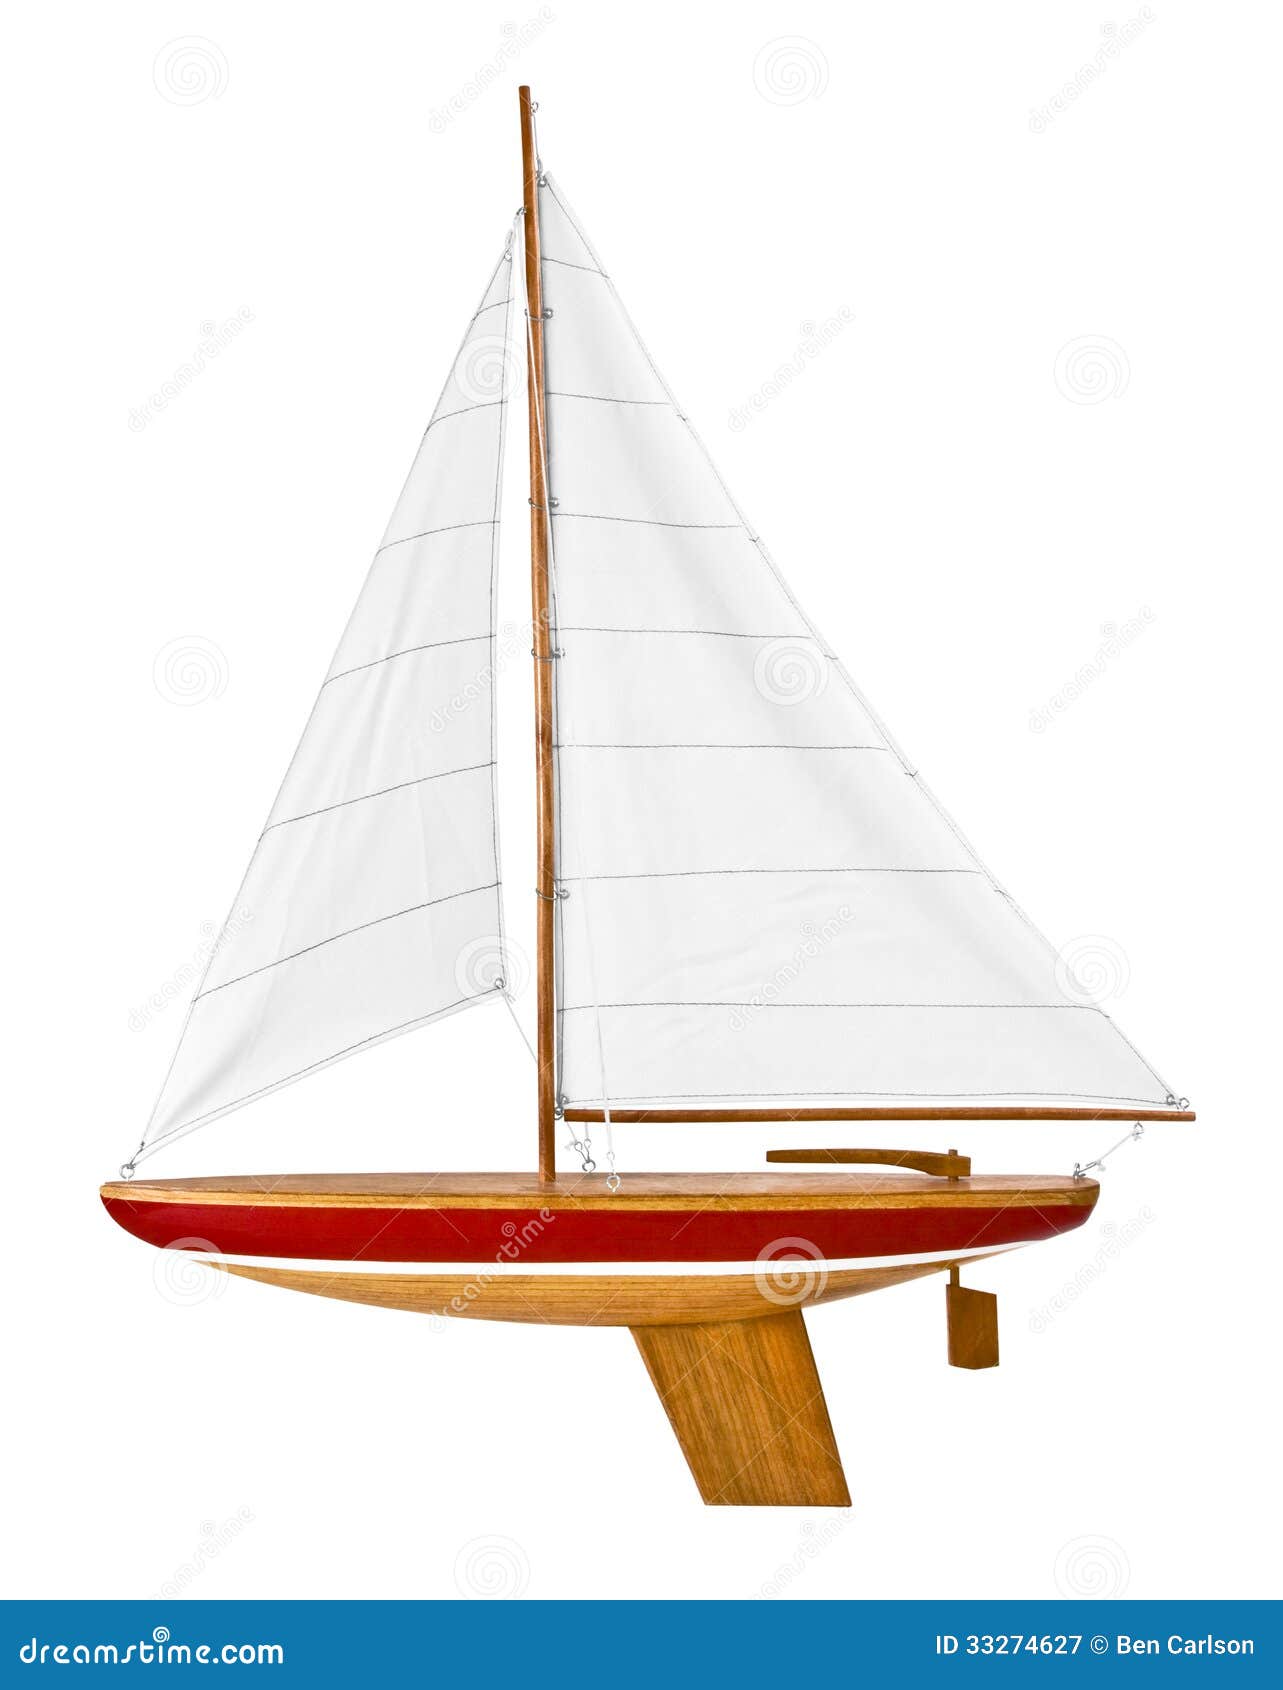 Sailboat Toy Royalty Free Stock Photography - Image: 33274627